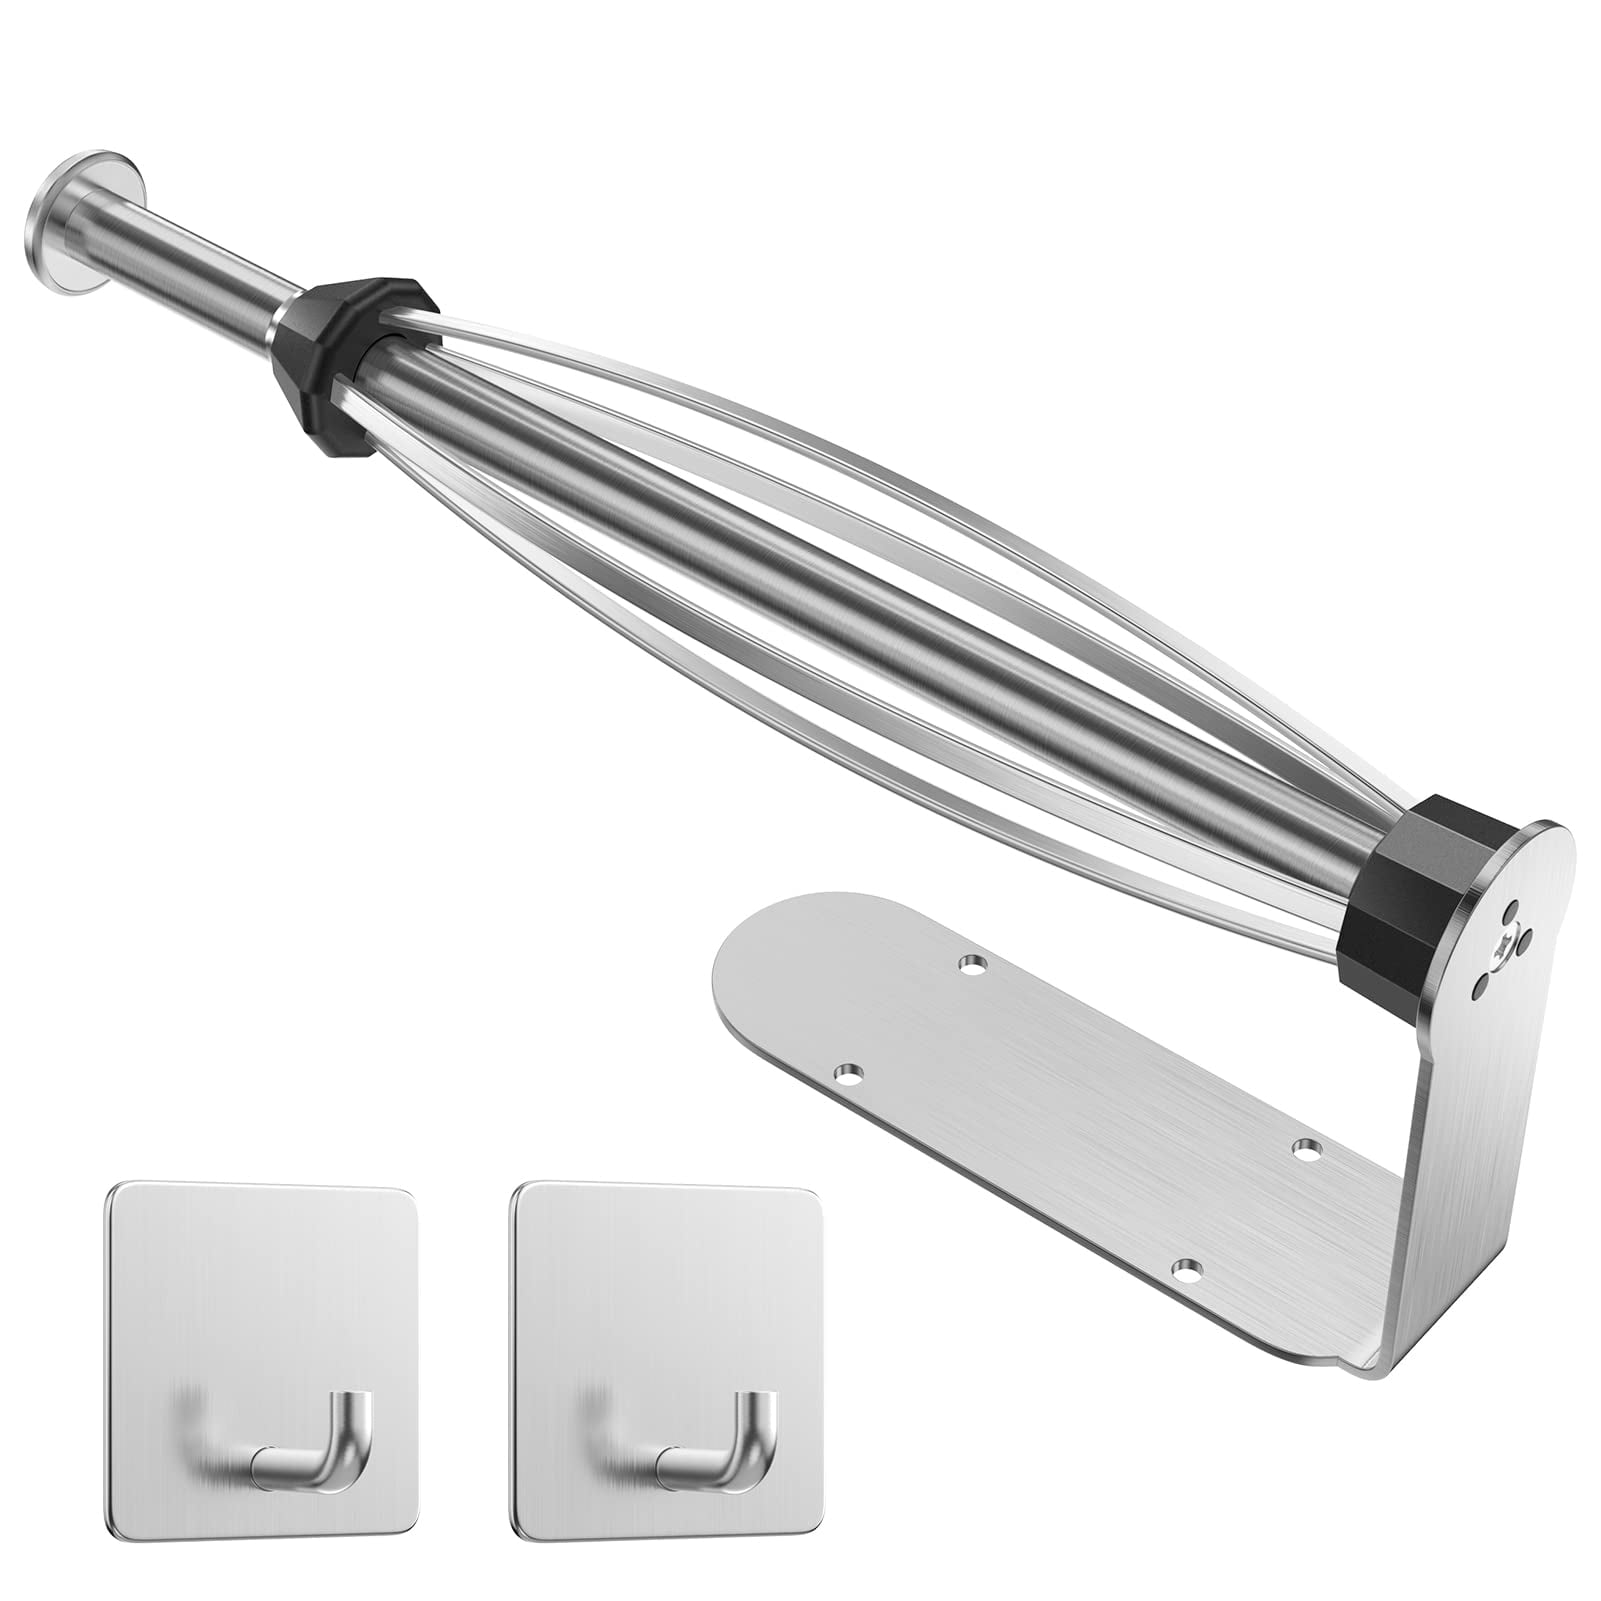  𝙉𝙤.𝟭 VICSEED Adjustable Paper Towel Holder Under Cabinet  [One Hand Tear Off] Paper Towel Holder Wall Mount [Versatile Rotatable] Paper  Roll Holder for Kitchen Bathroom Toilet RVs (Adhesive, Screw)